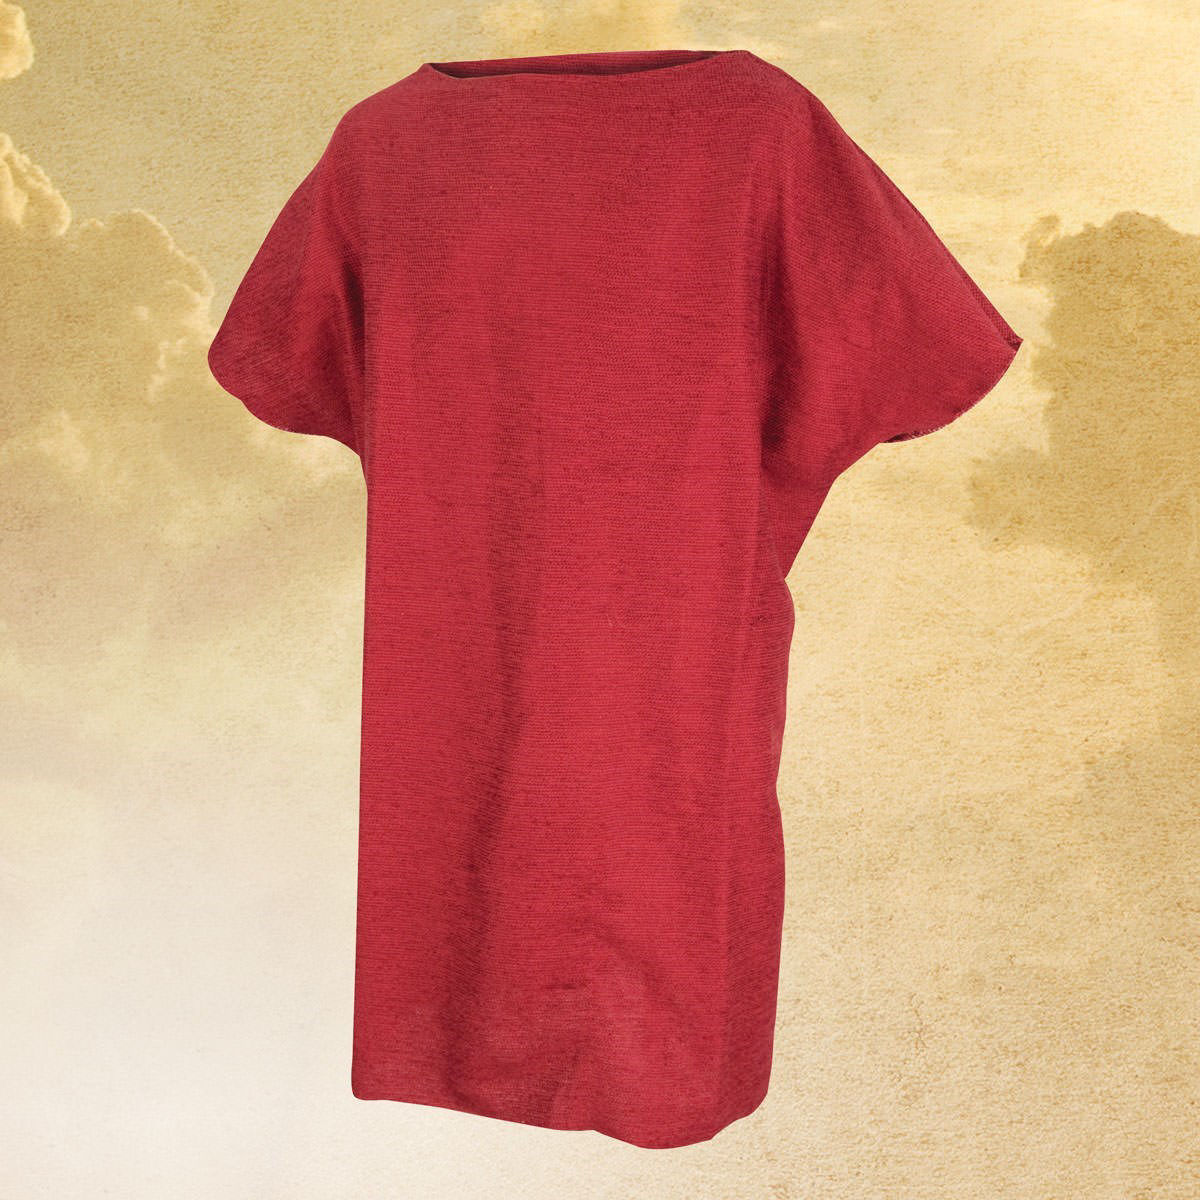 Simple, 100% cotton Roman tunic is two pieces of fabric sewn together with open slits for the head and arms and frayed edges